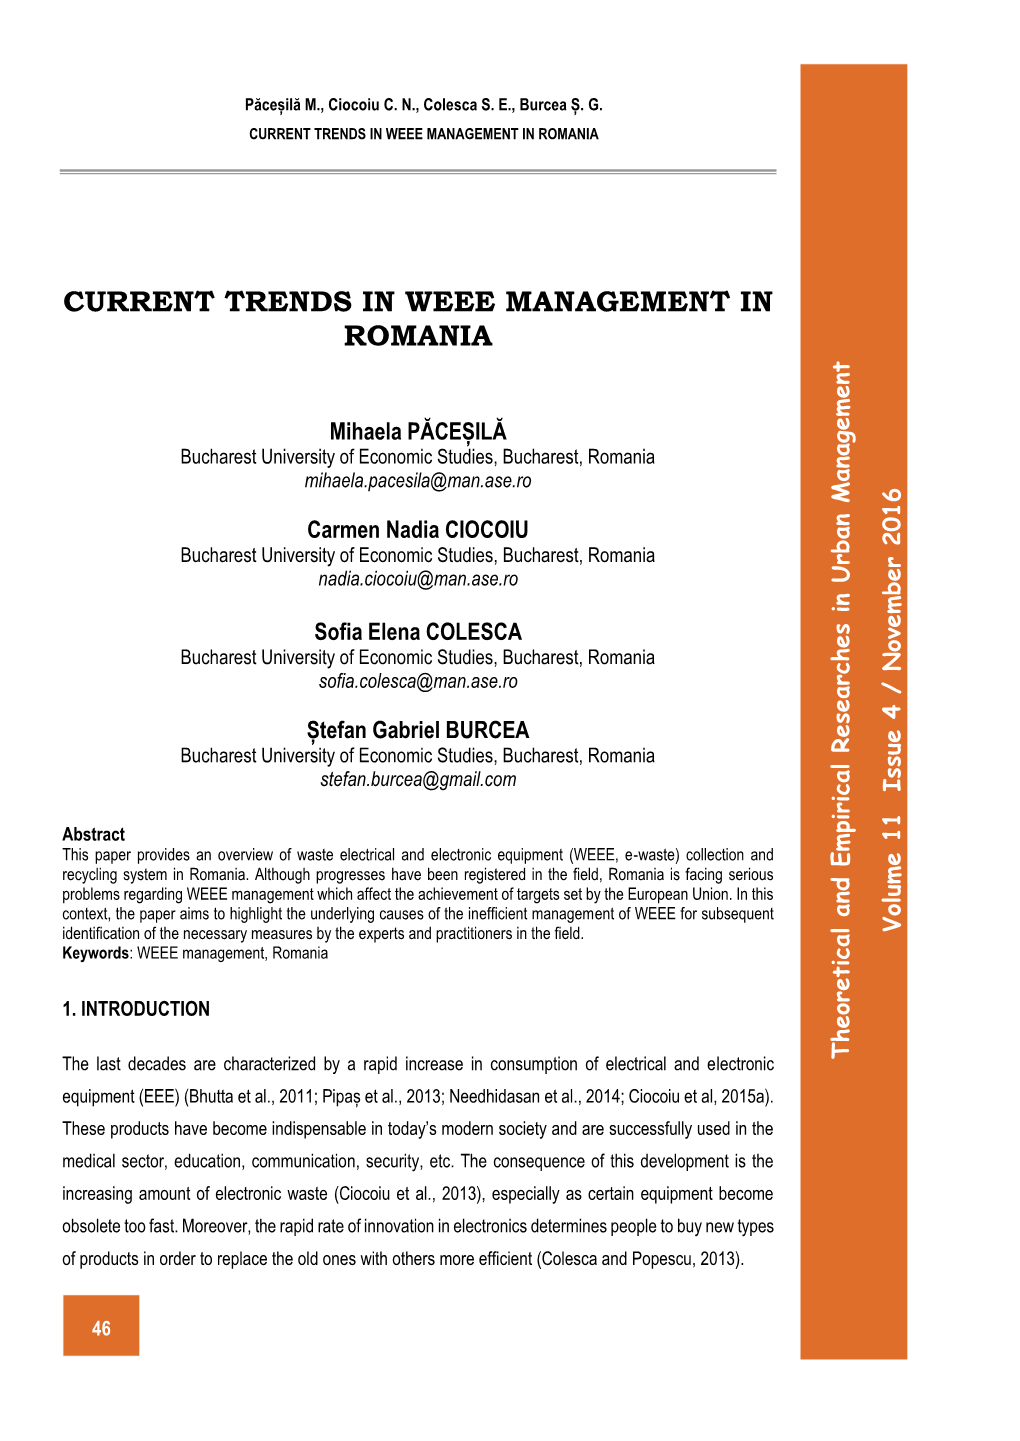 Current Trends in Weee Management in Romania